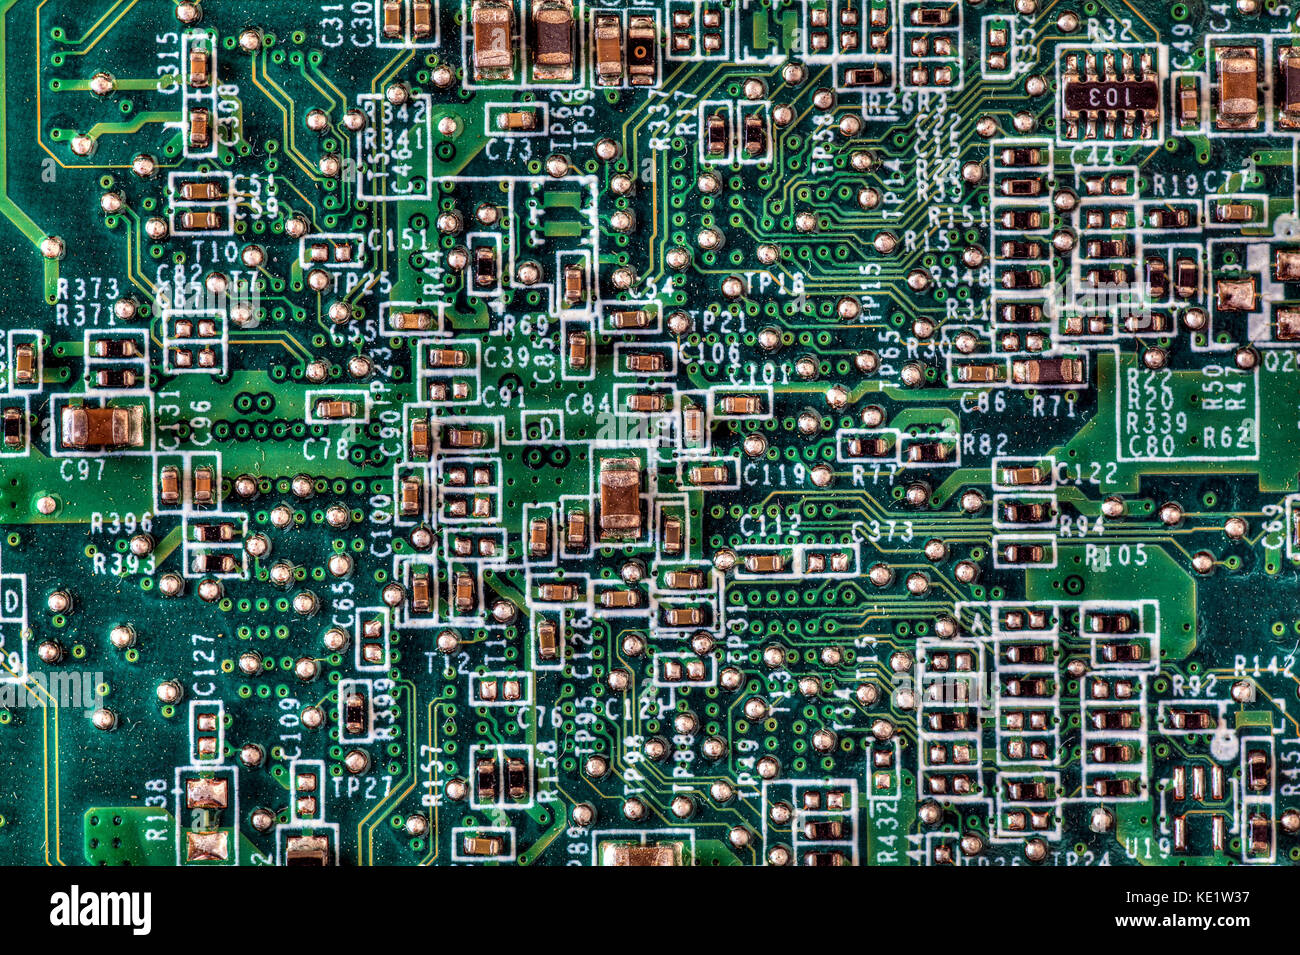 Backgrounds and backdrops.- circuit board. Stock Photo